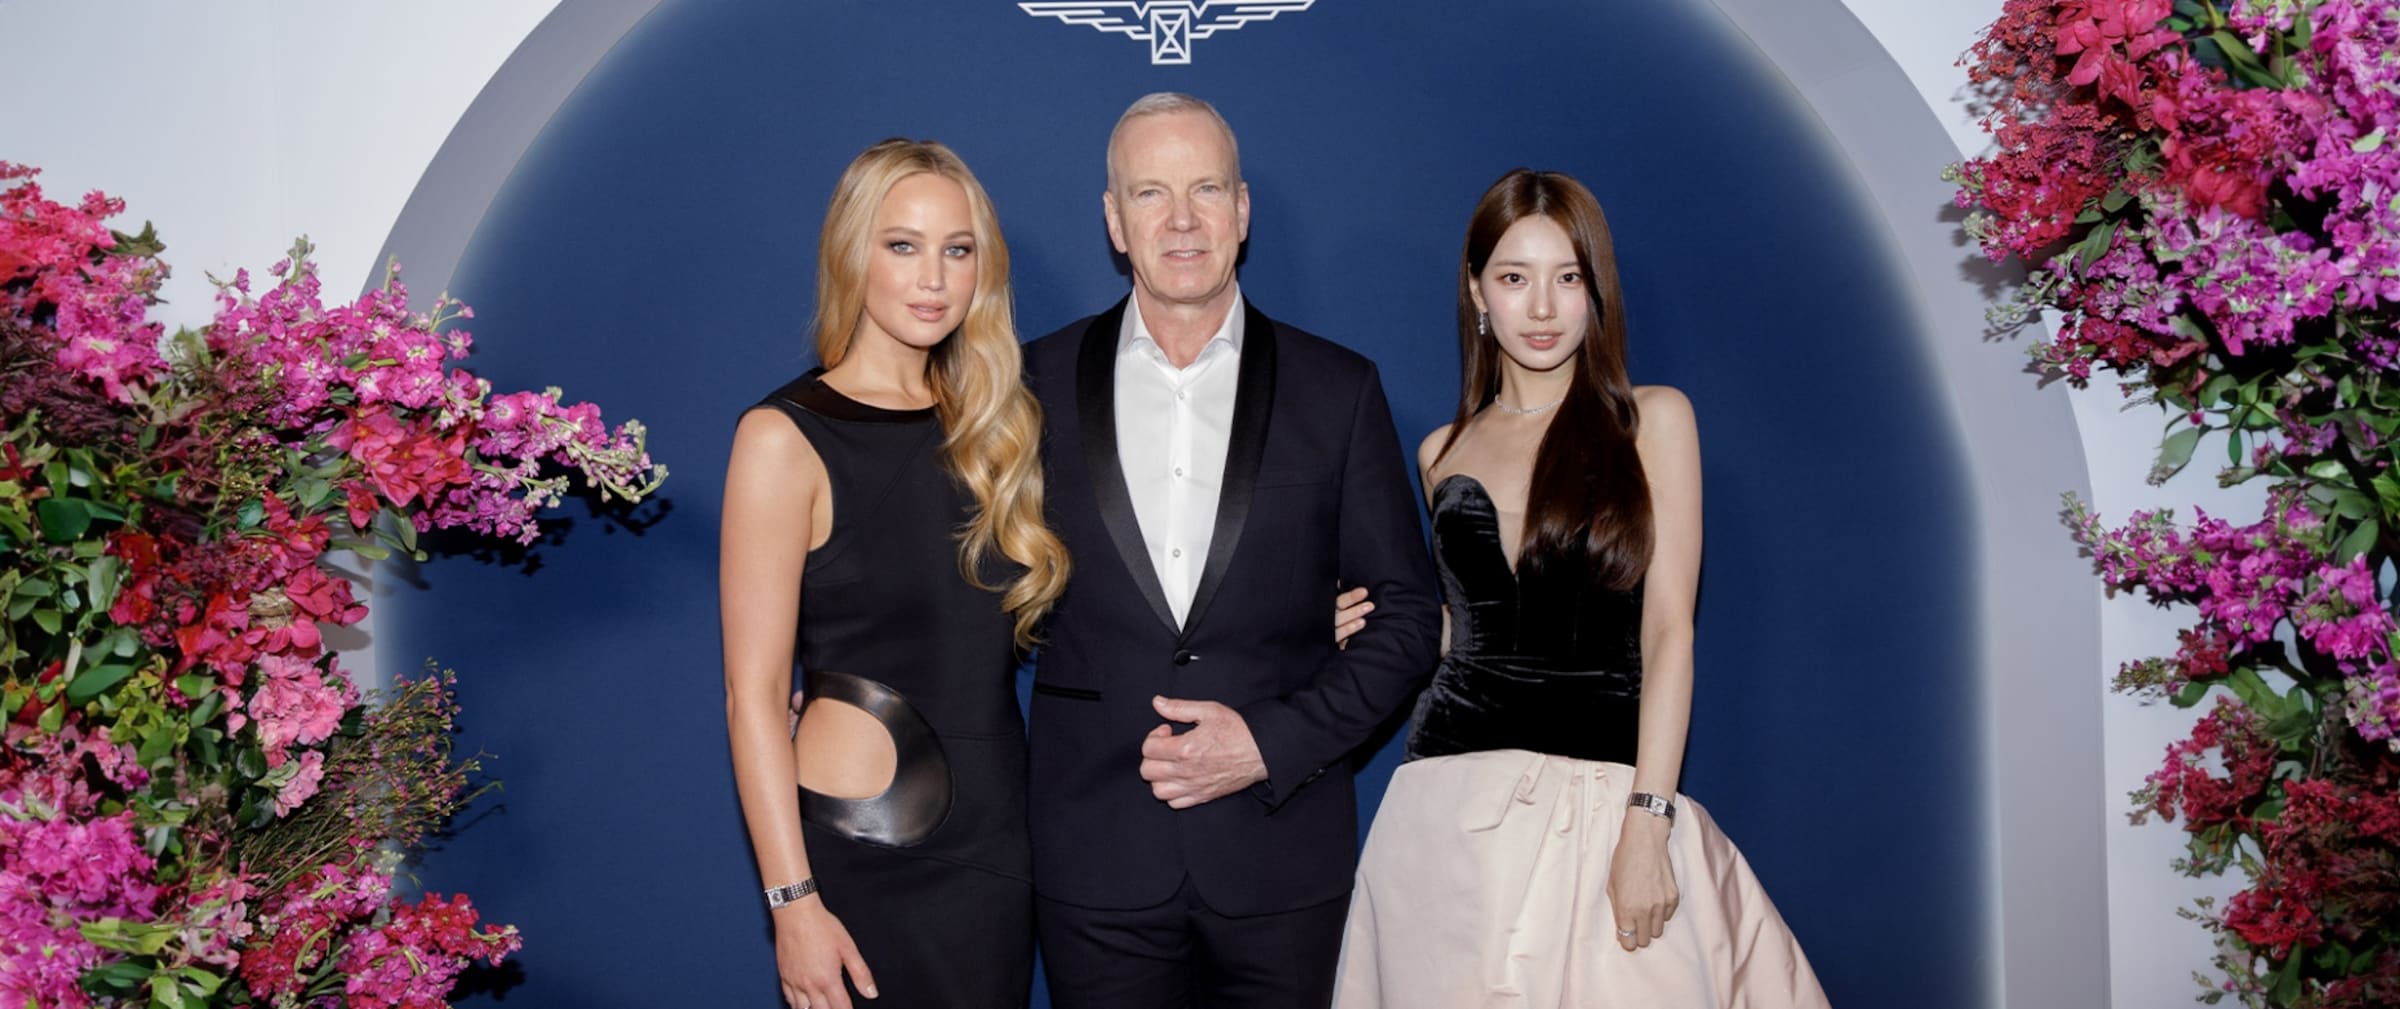 Longines Mini DolceVita launched during New York City event